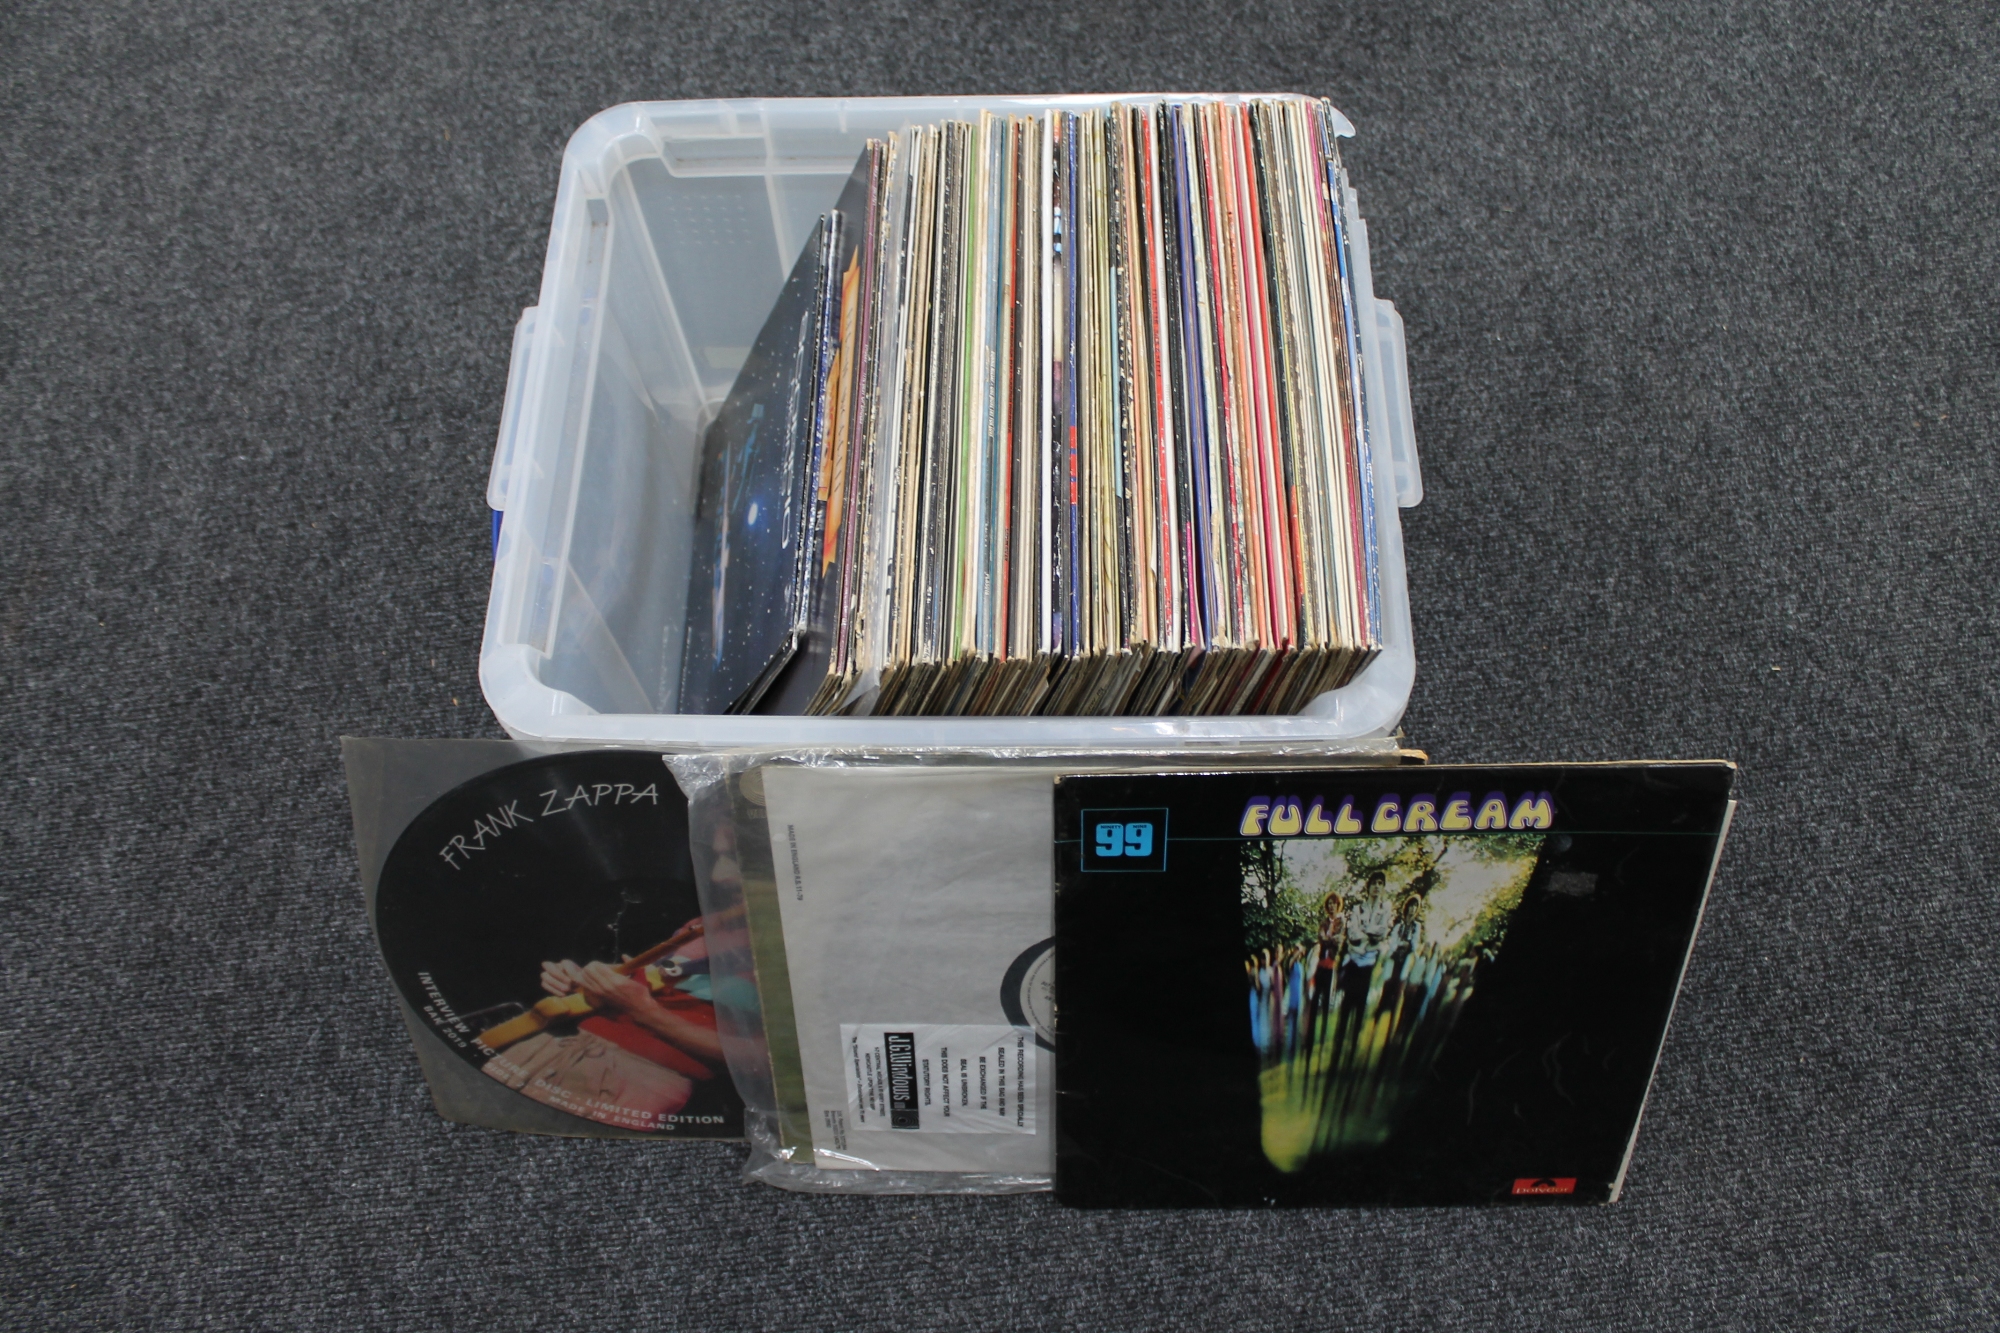 A plastic crate of LP's, rock and pop,